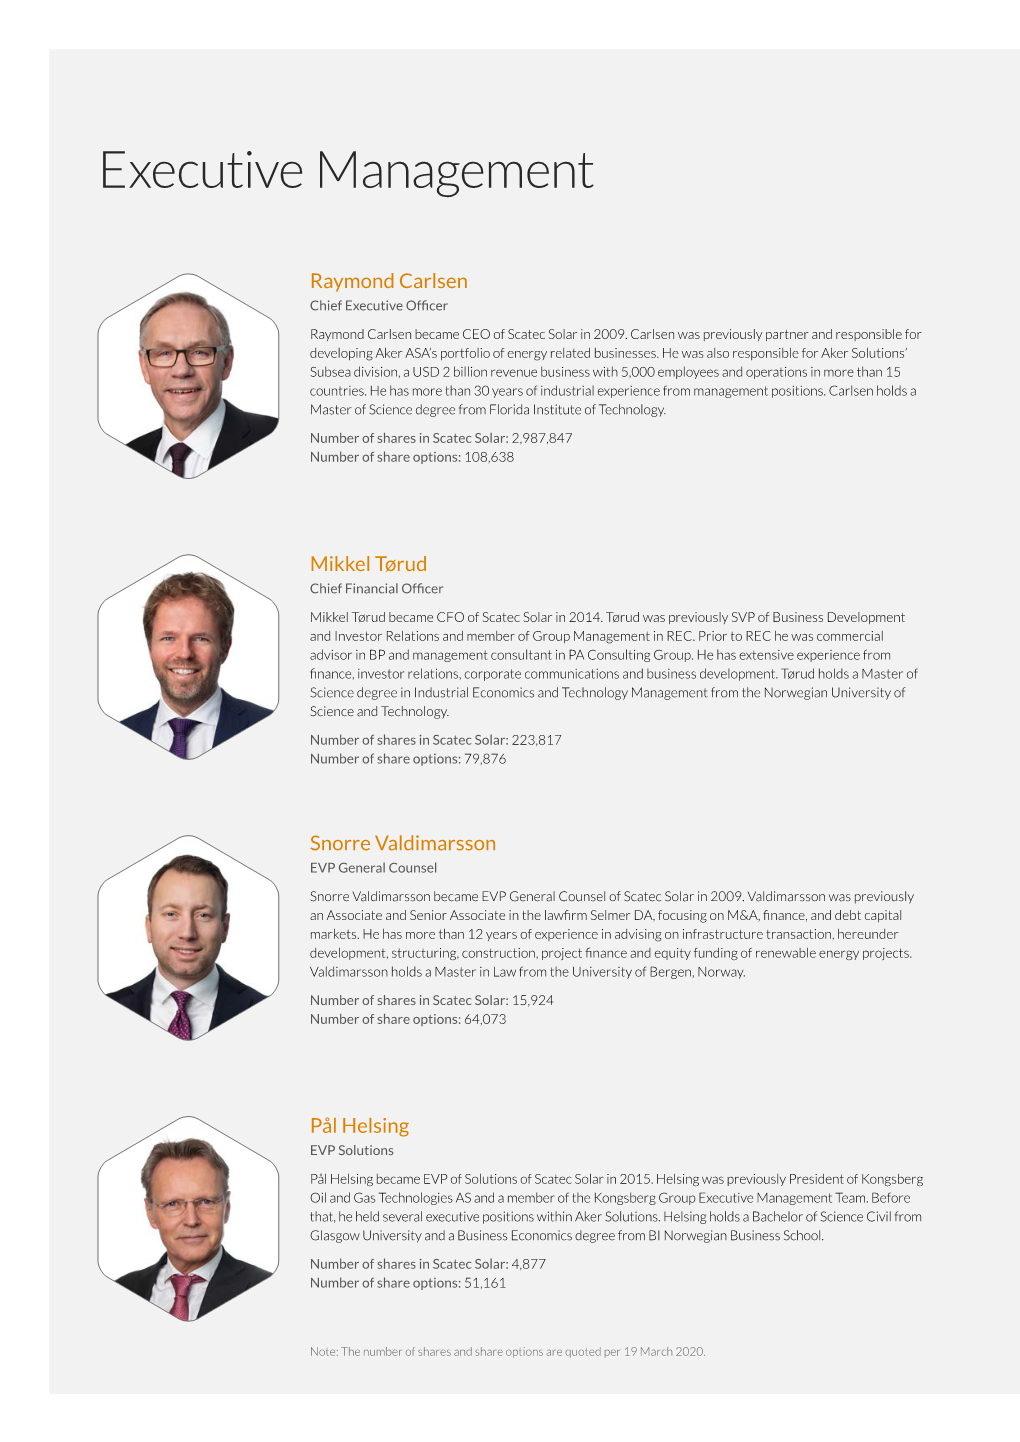 5 Management and Board of Directors